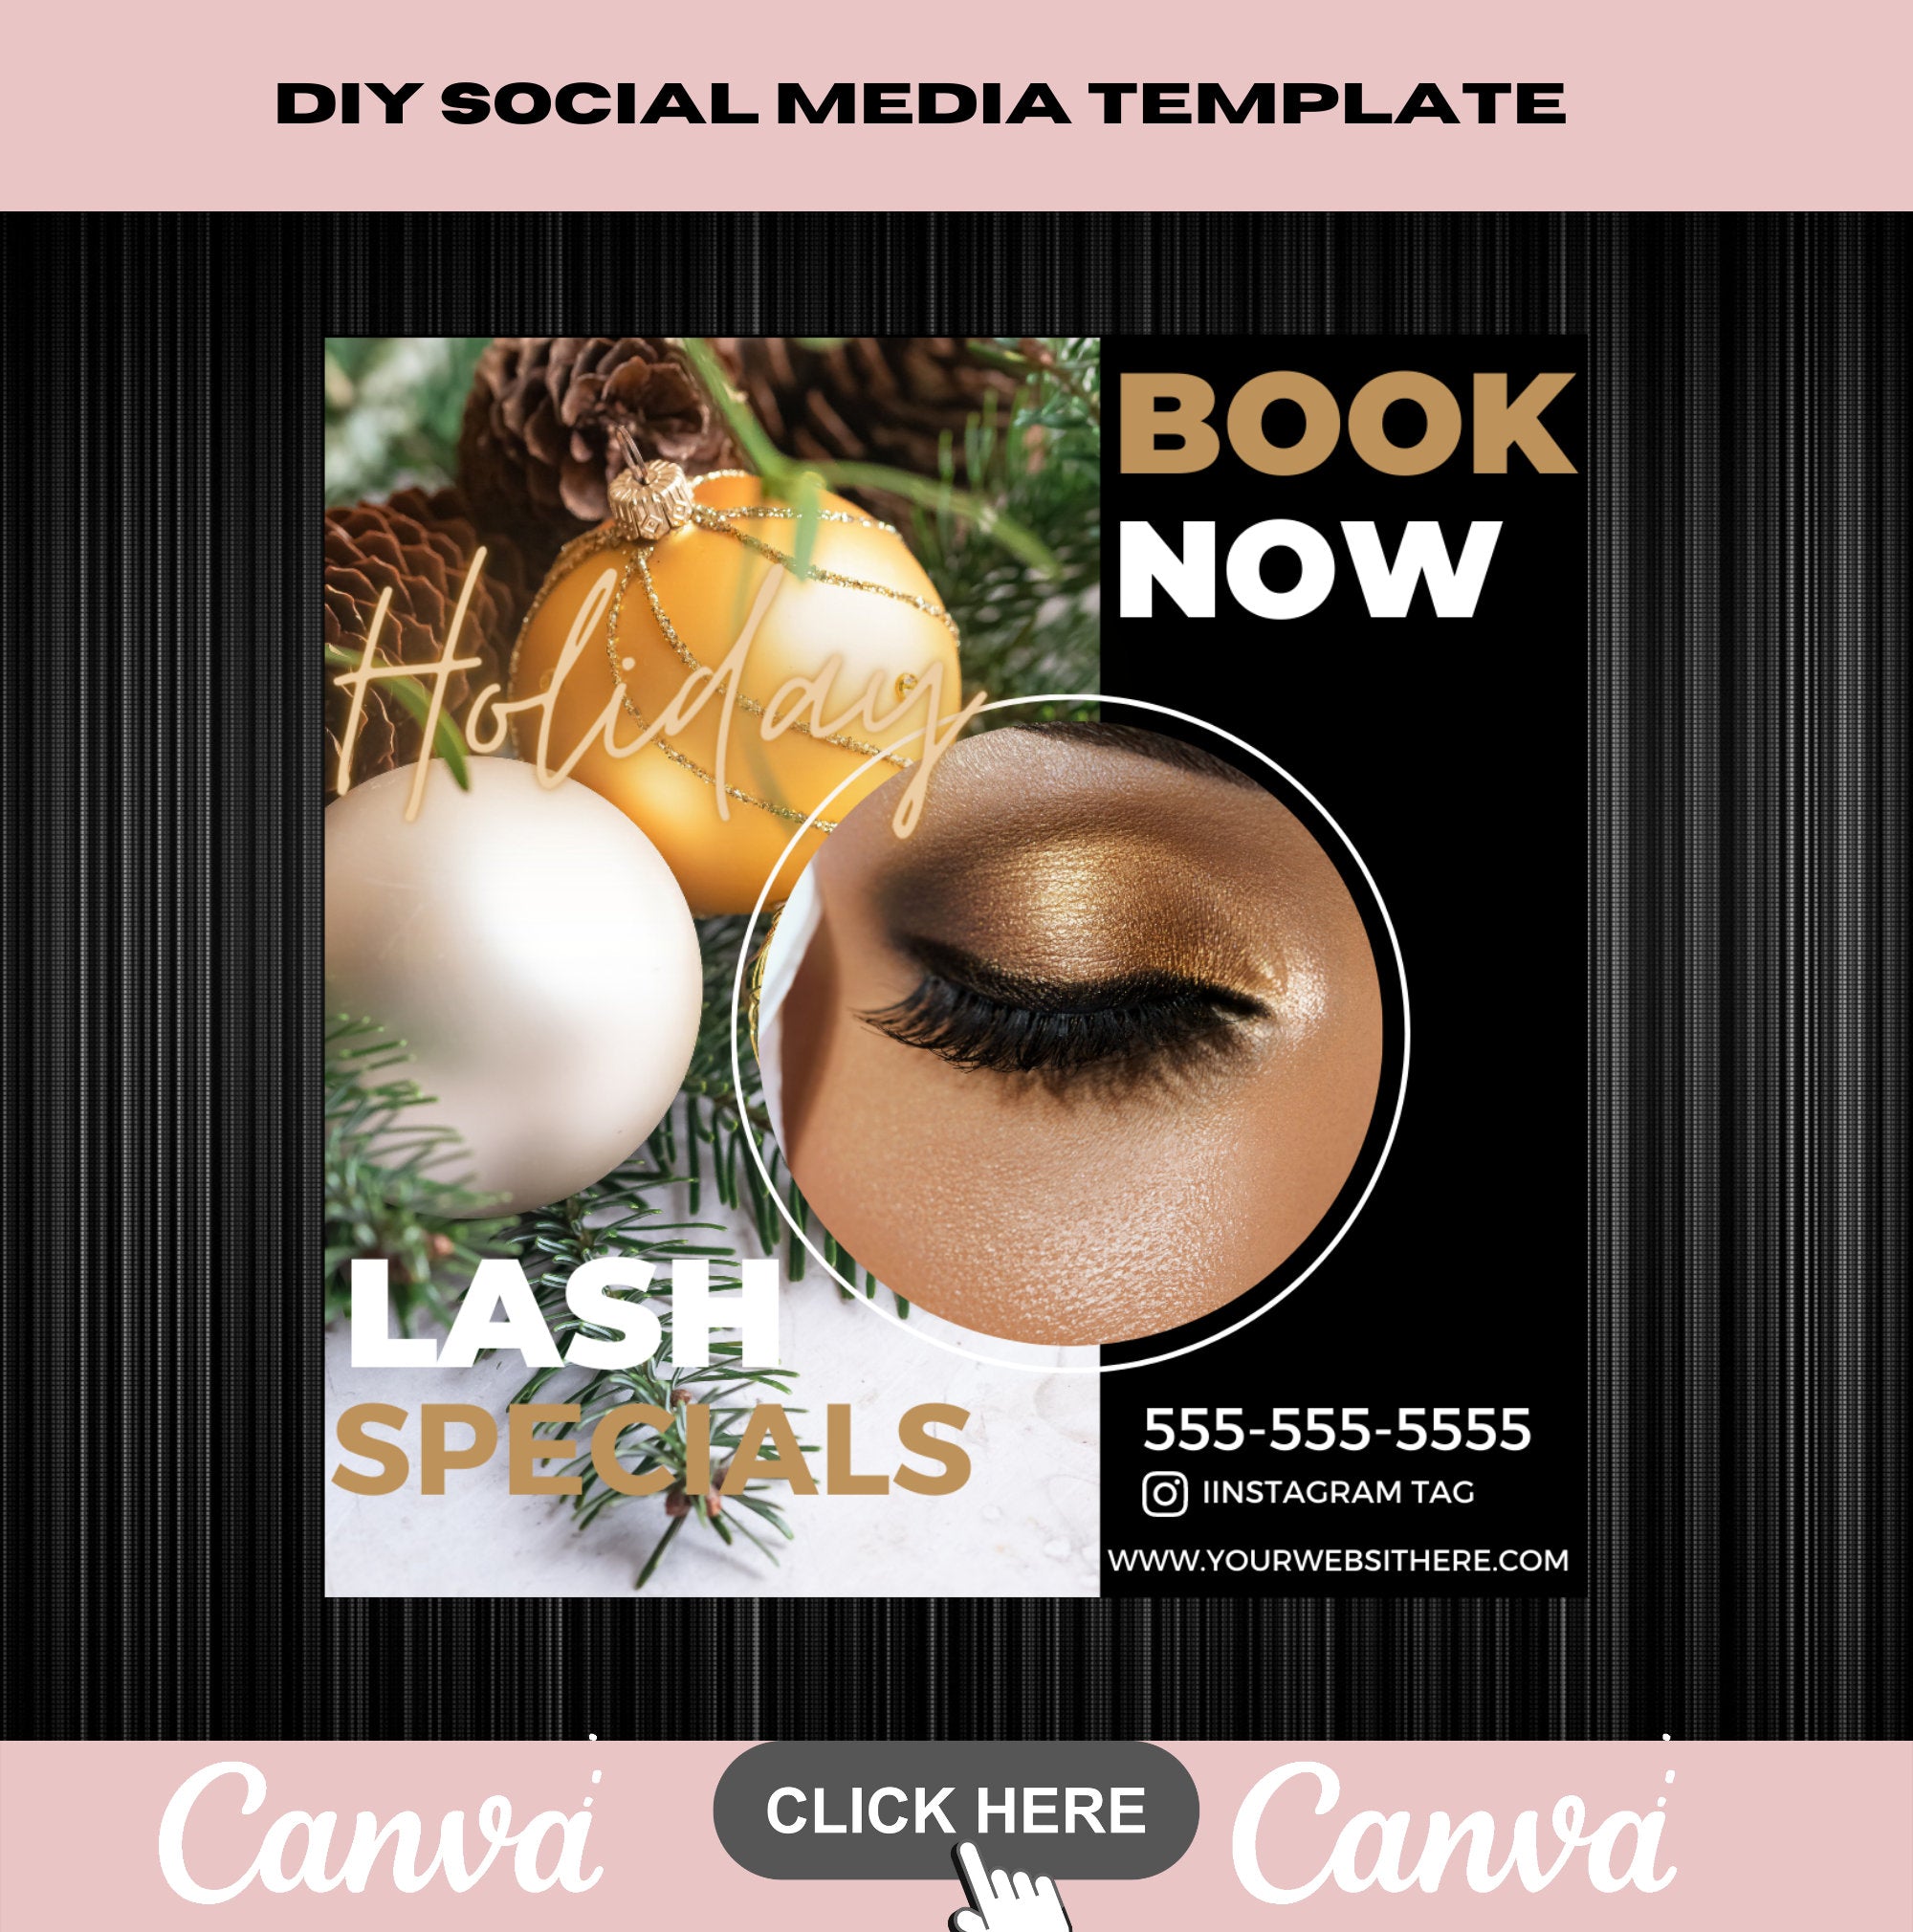 BOOK Now Holiday Lash Flyer Template, Business Post, Social Media Post, Lash Extensions, DIY Template